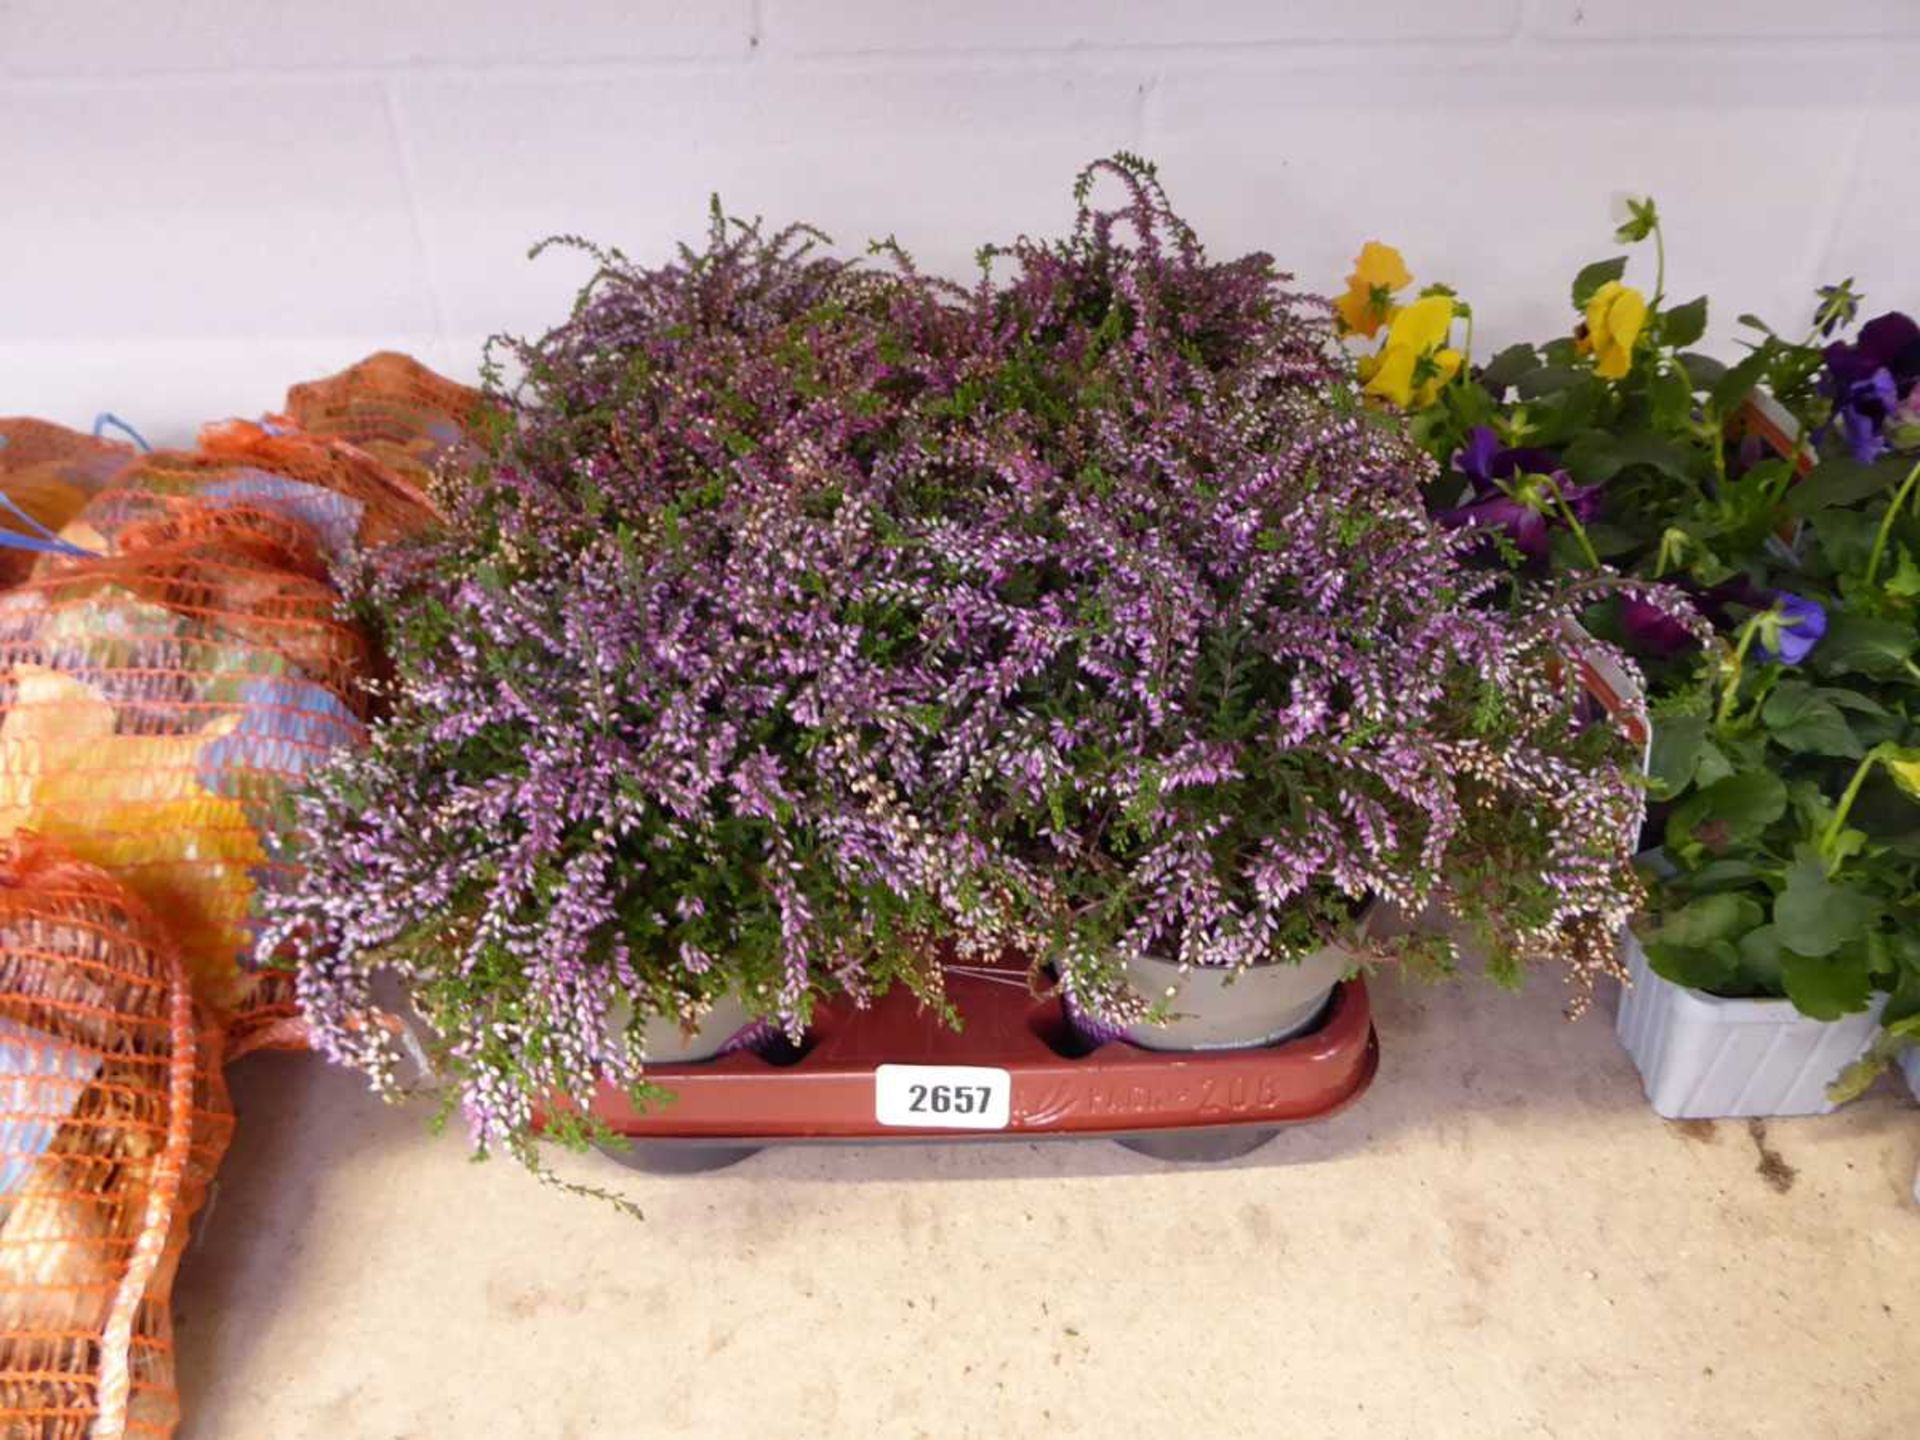 Tray containing 8 pots of Heather